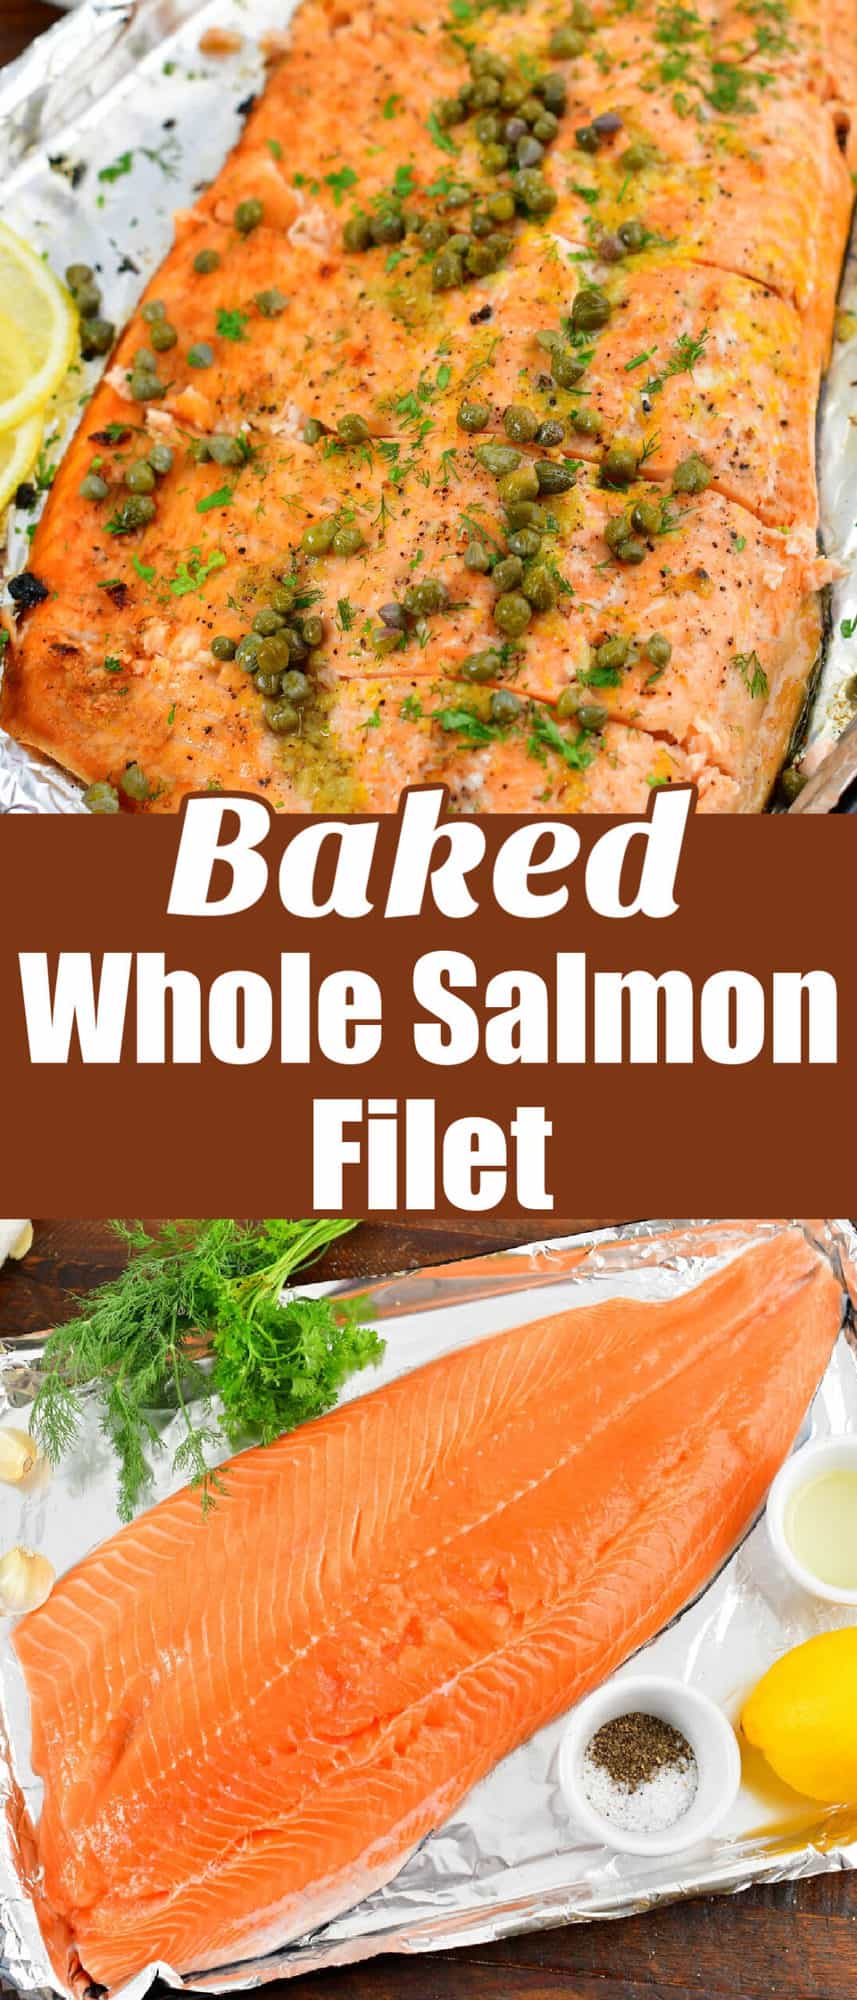 collage of two images of whole salmon filet and title